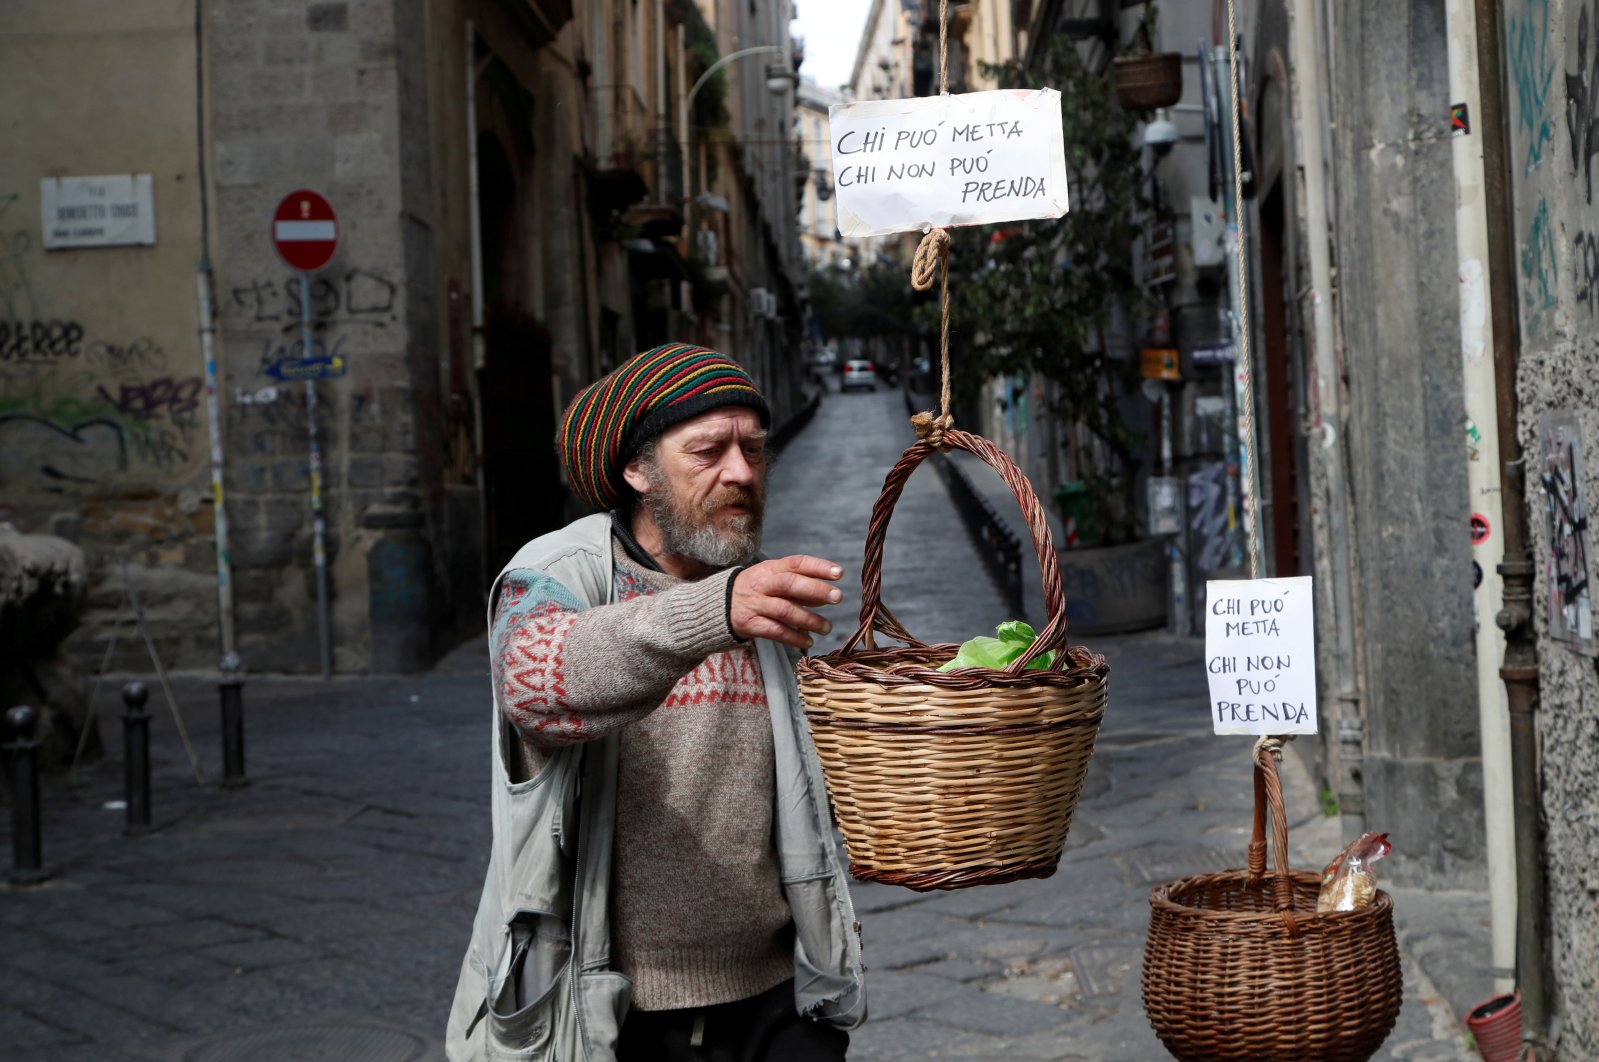 A man reaches to a basket that was hung up so people can donate or take free food, as Italy struggles to contain the spread of the coronavirus, in Naples, Italy, Monday, March 30, 2020. The sign reads: "Who can puts in, who can't takes." (Reuters Photo)